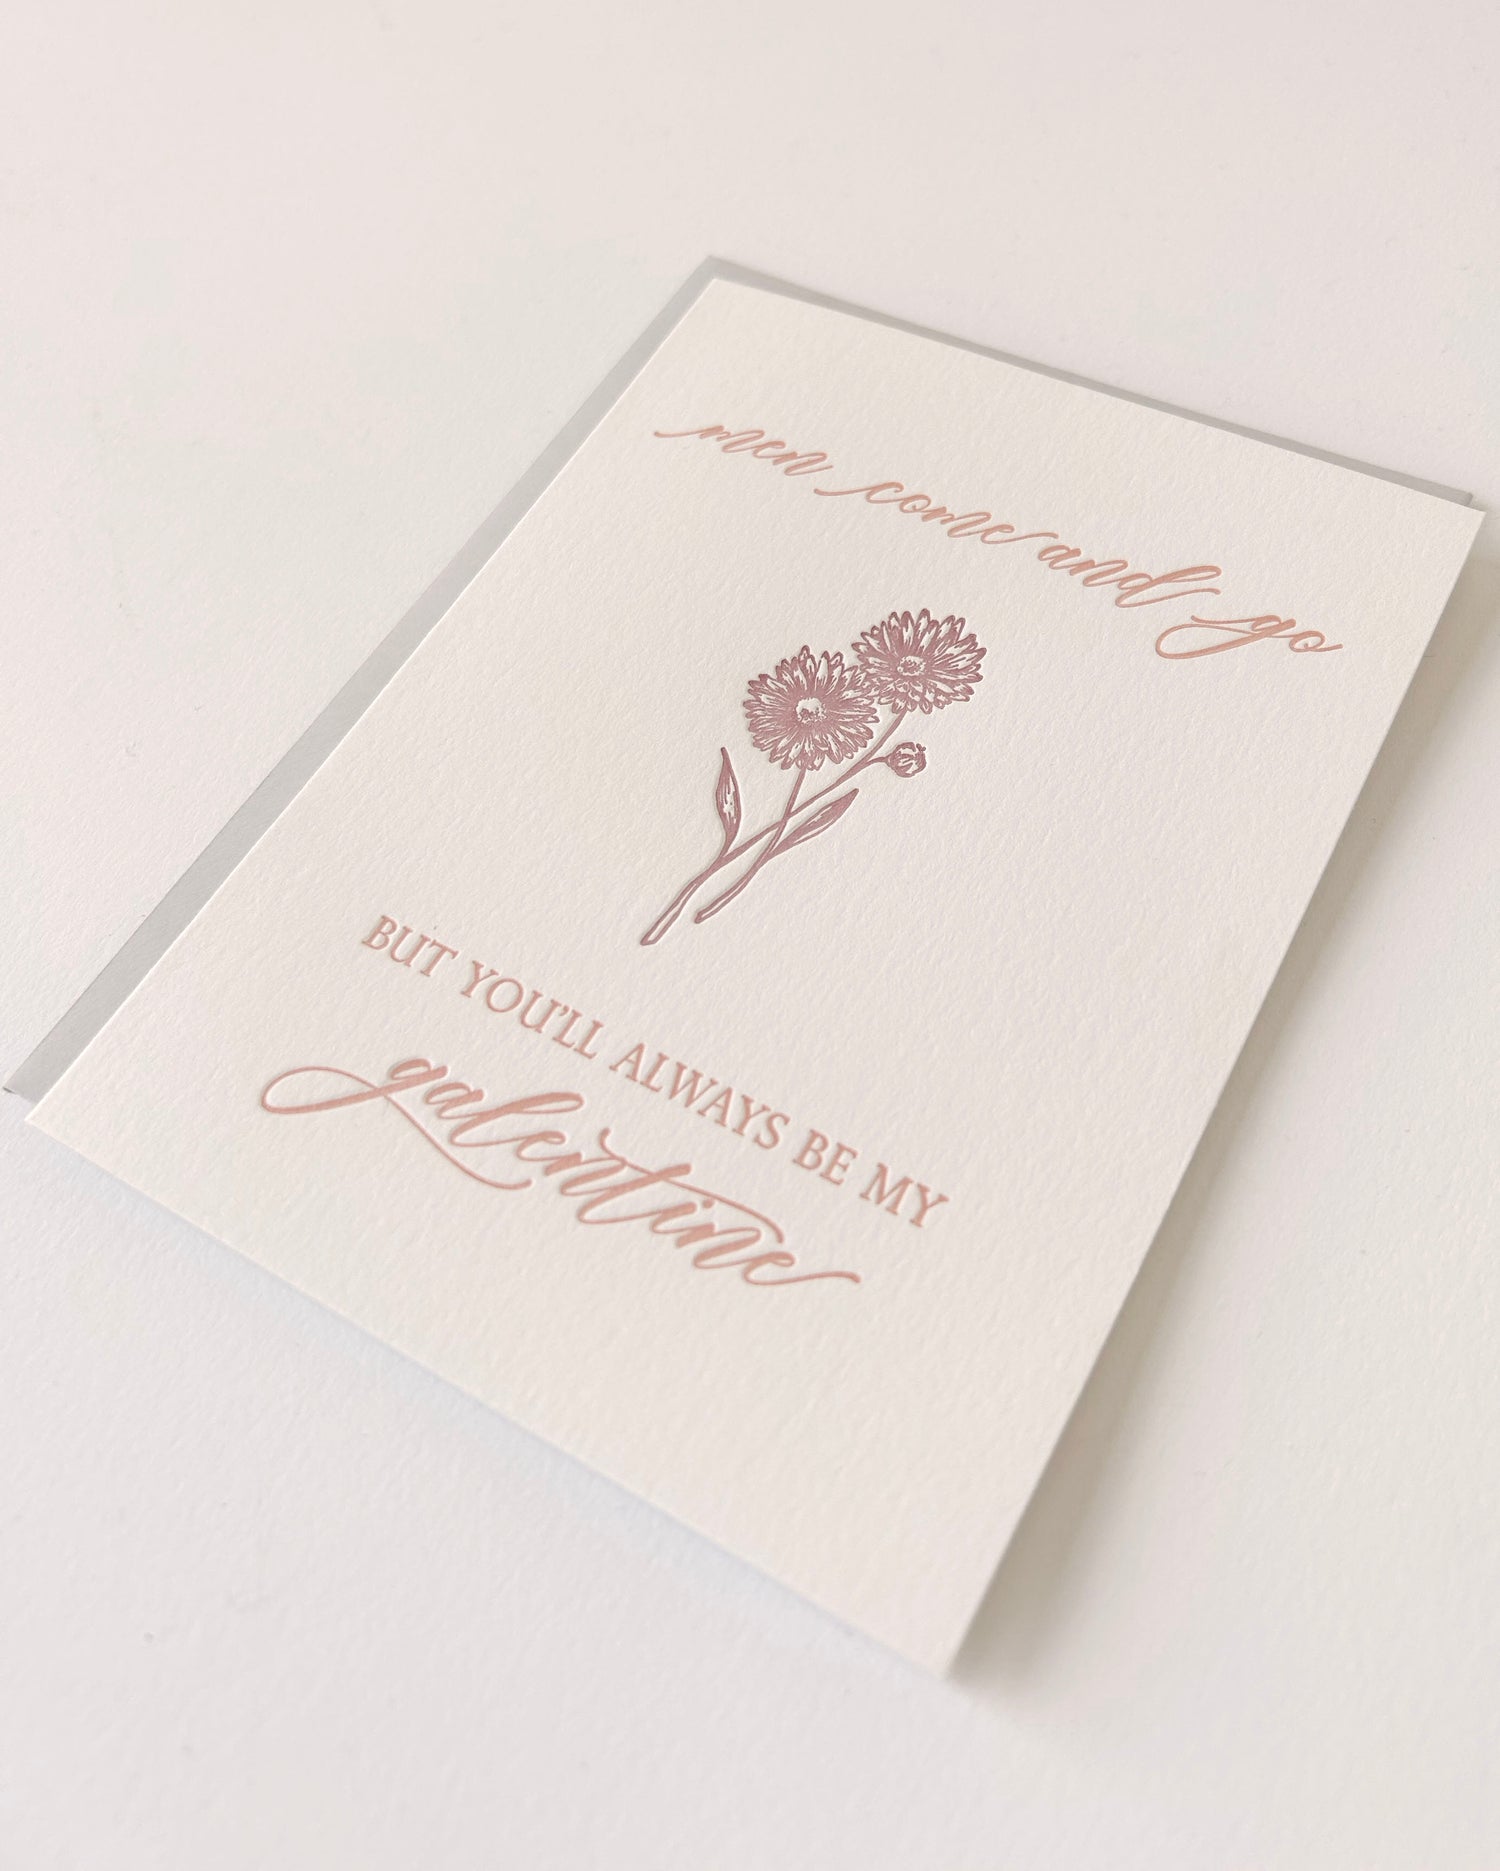 Letterpress love card with a flower that says "Men Come and Go But You'll Always Be My Galentine" by Rust Belt Love